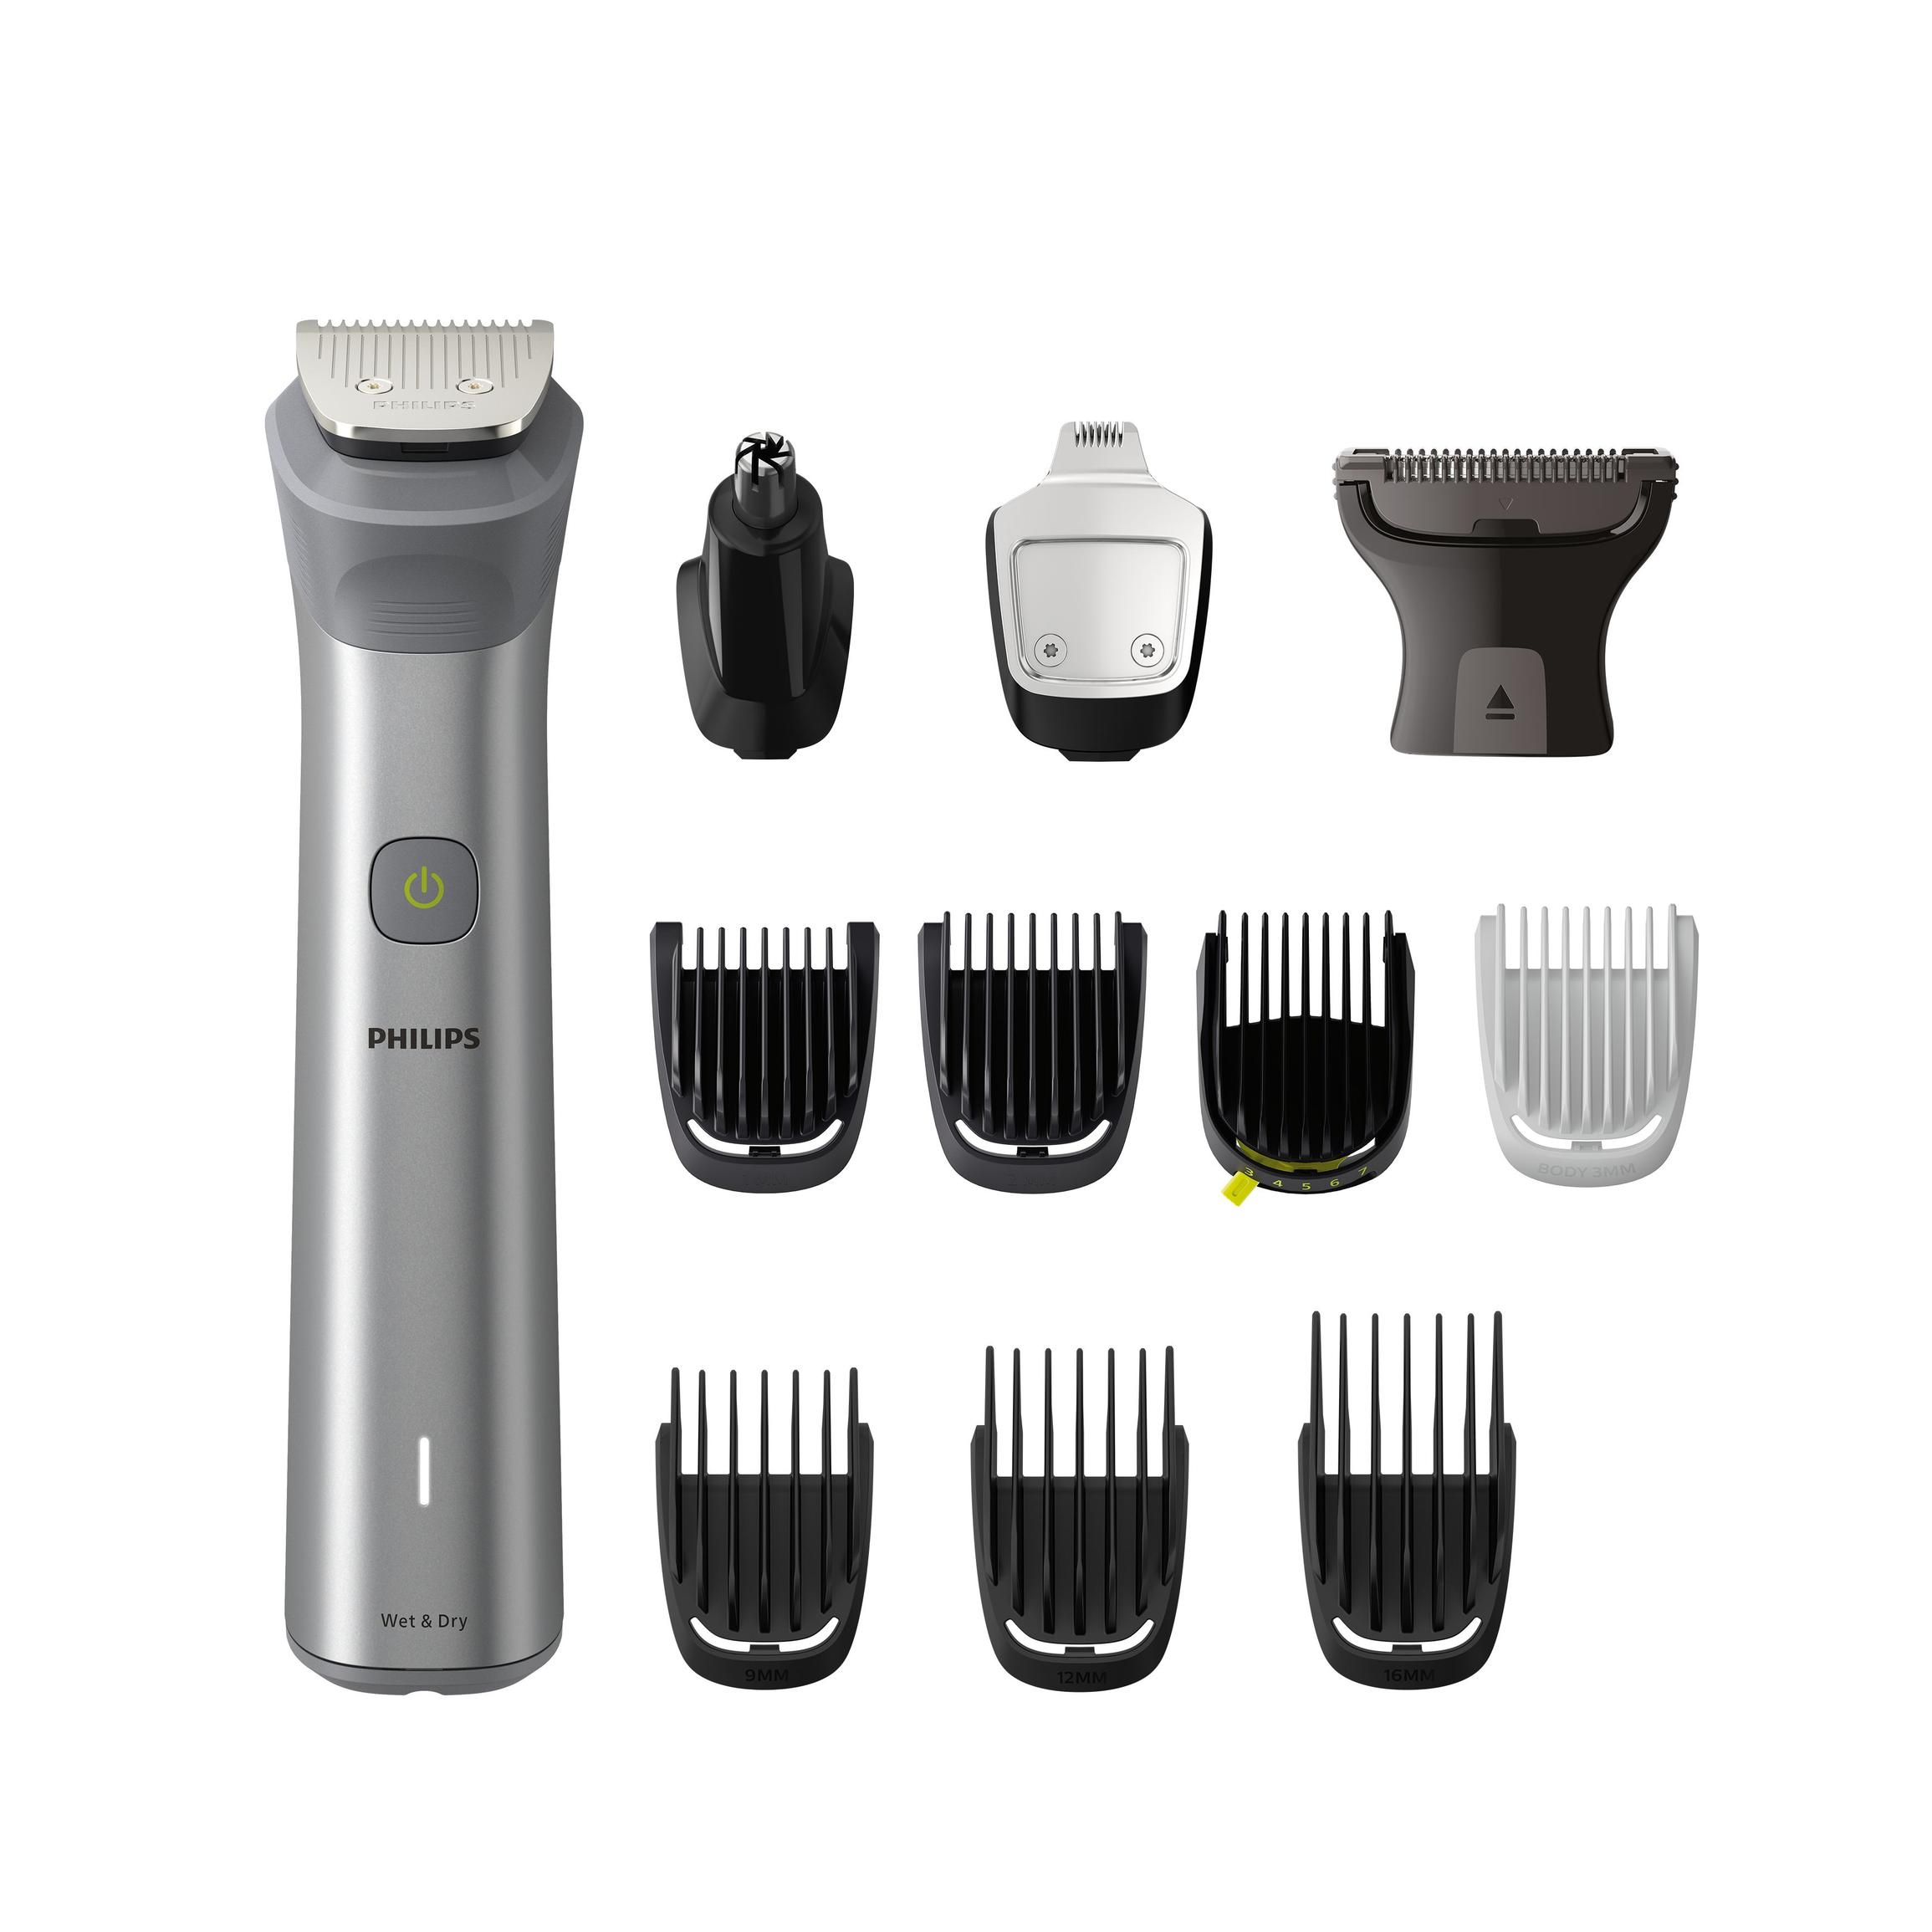 Offerta per Philips - All-in-One Trimmer MG5940/15 Serie 5000 a 54,99€ in Euronics